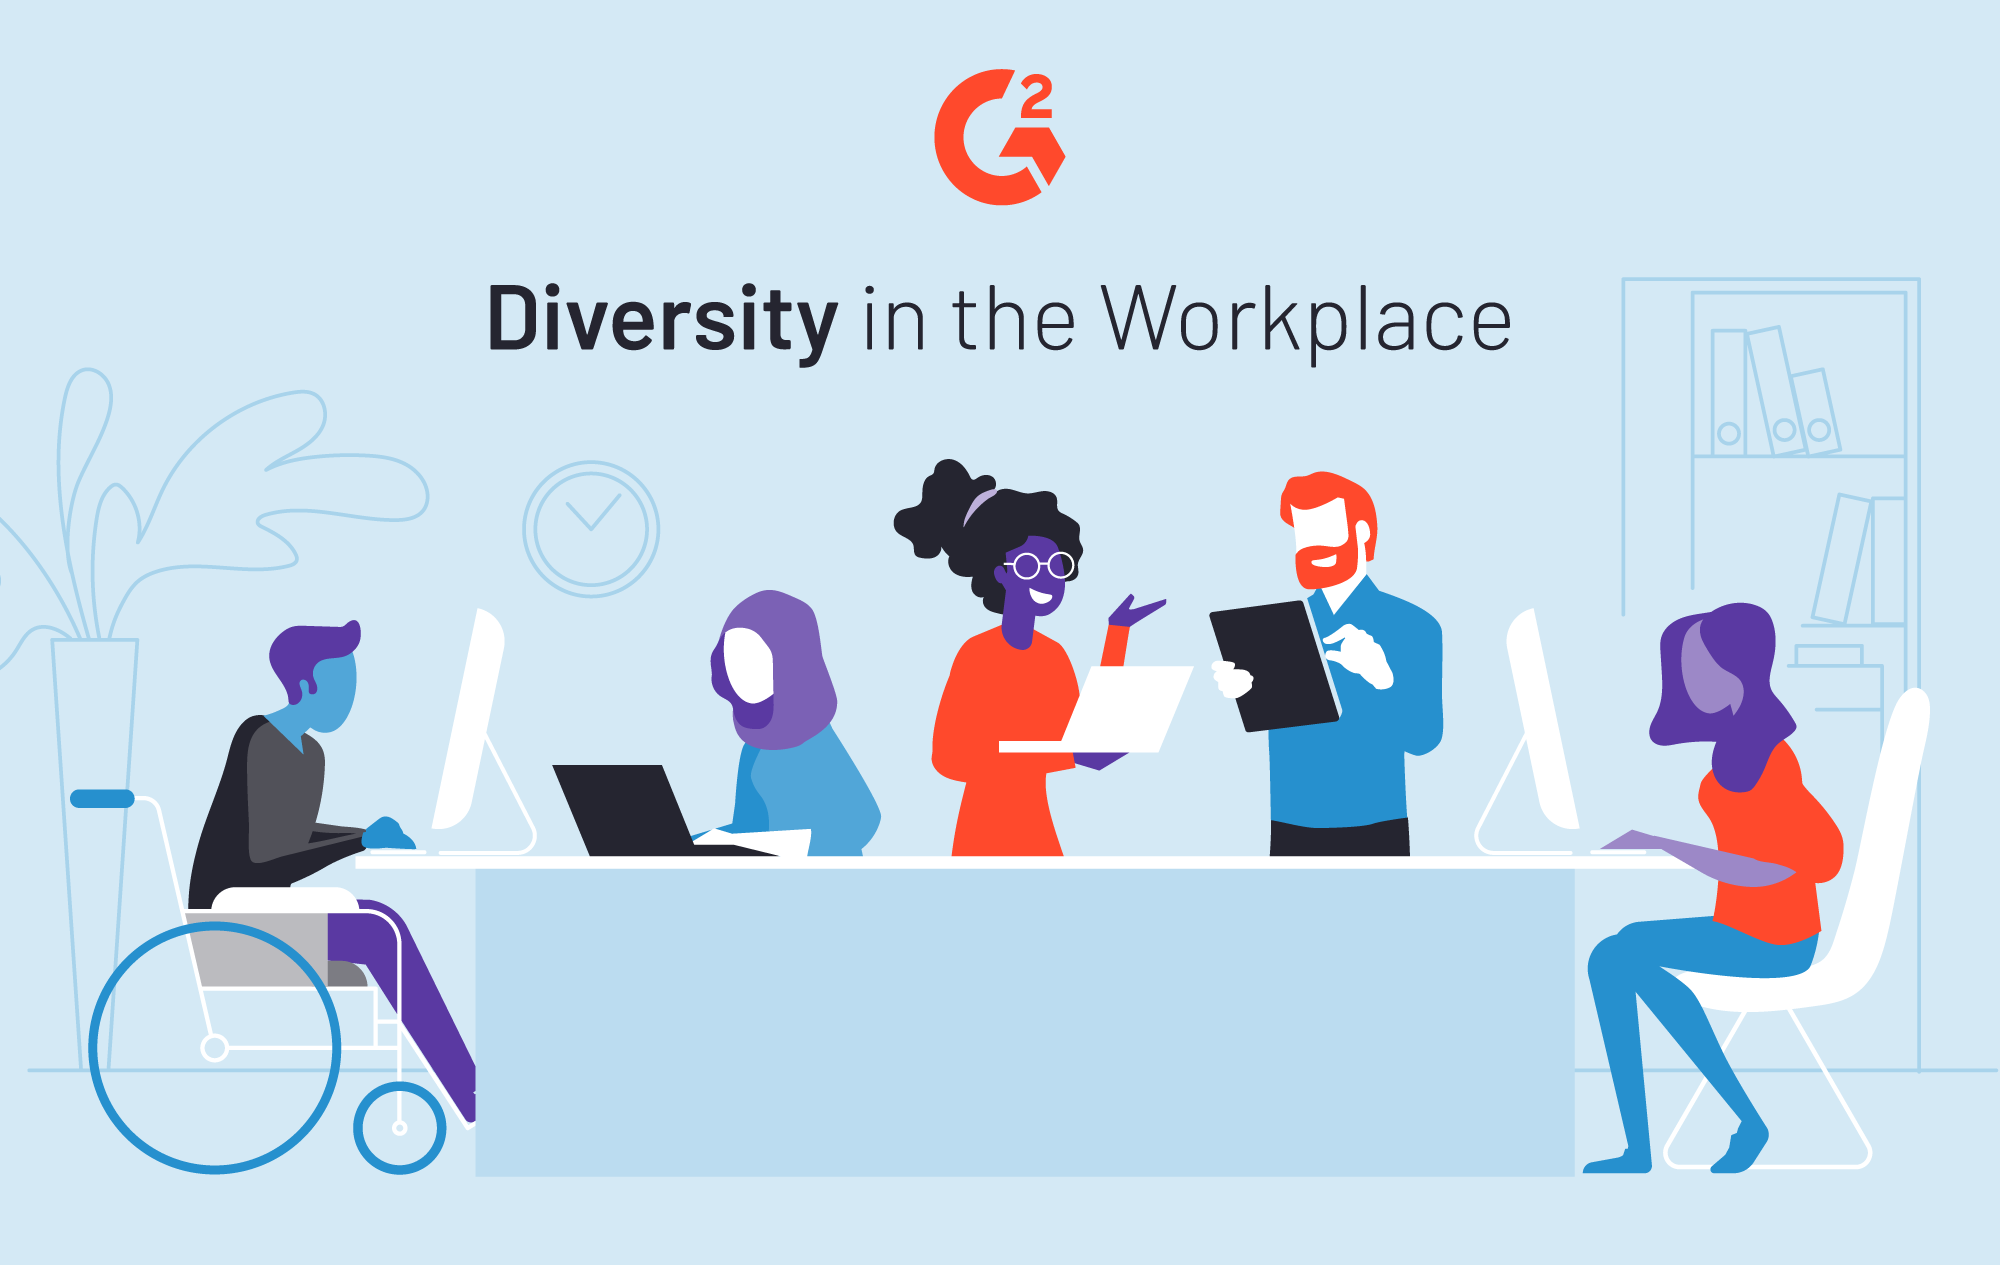 empirical research on diversity in the workplace